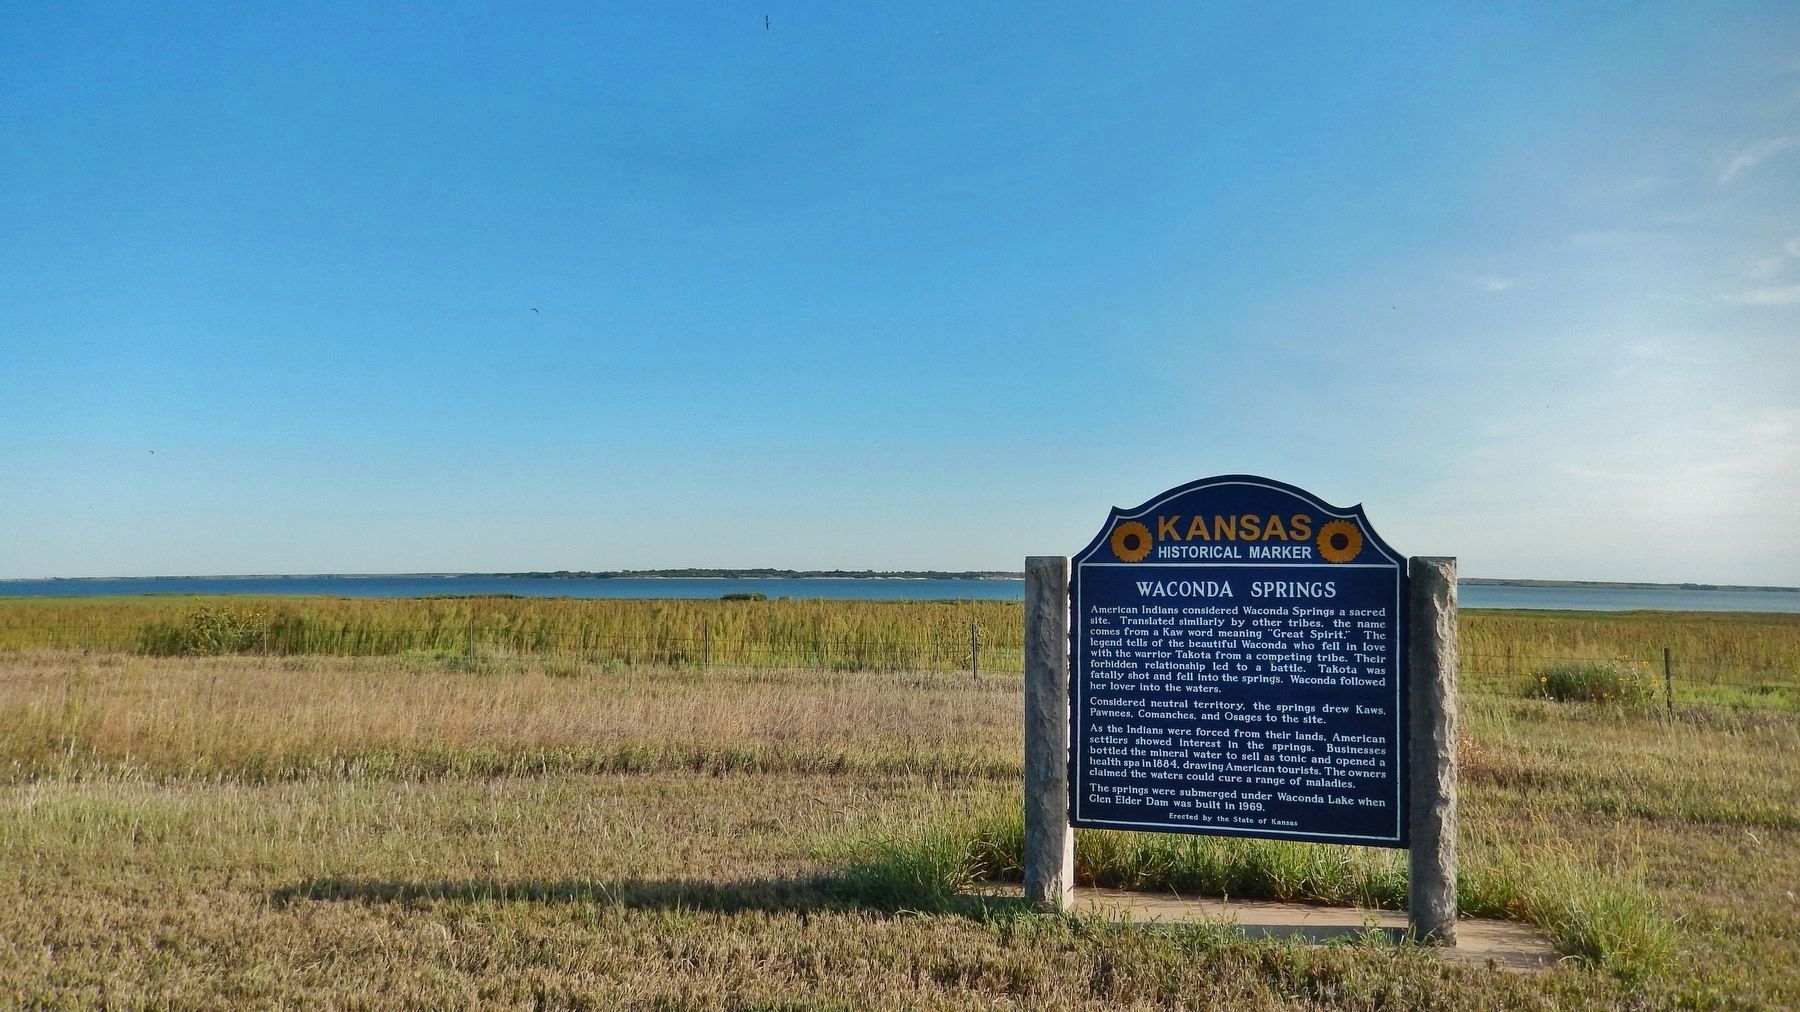 Waconda Springs Marker (<i>wide view from pull-out; Lake Waconda in the background</i>) image. Click for full size.